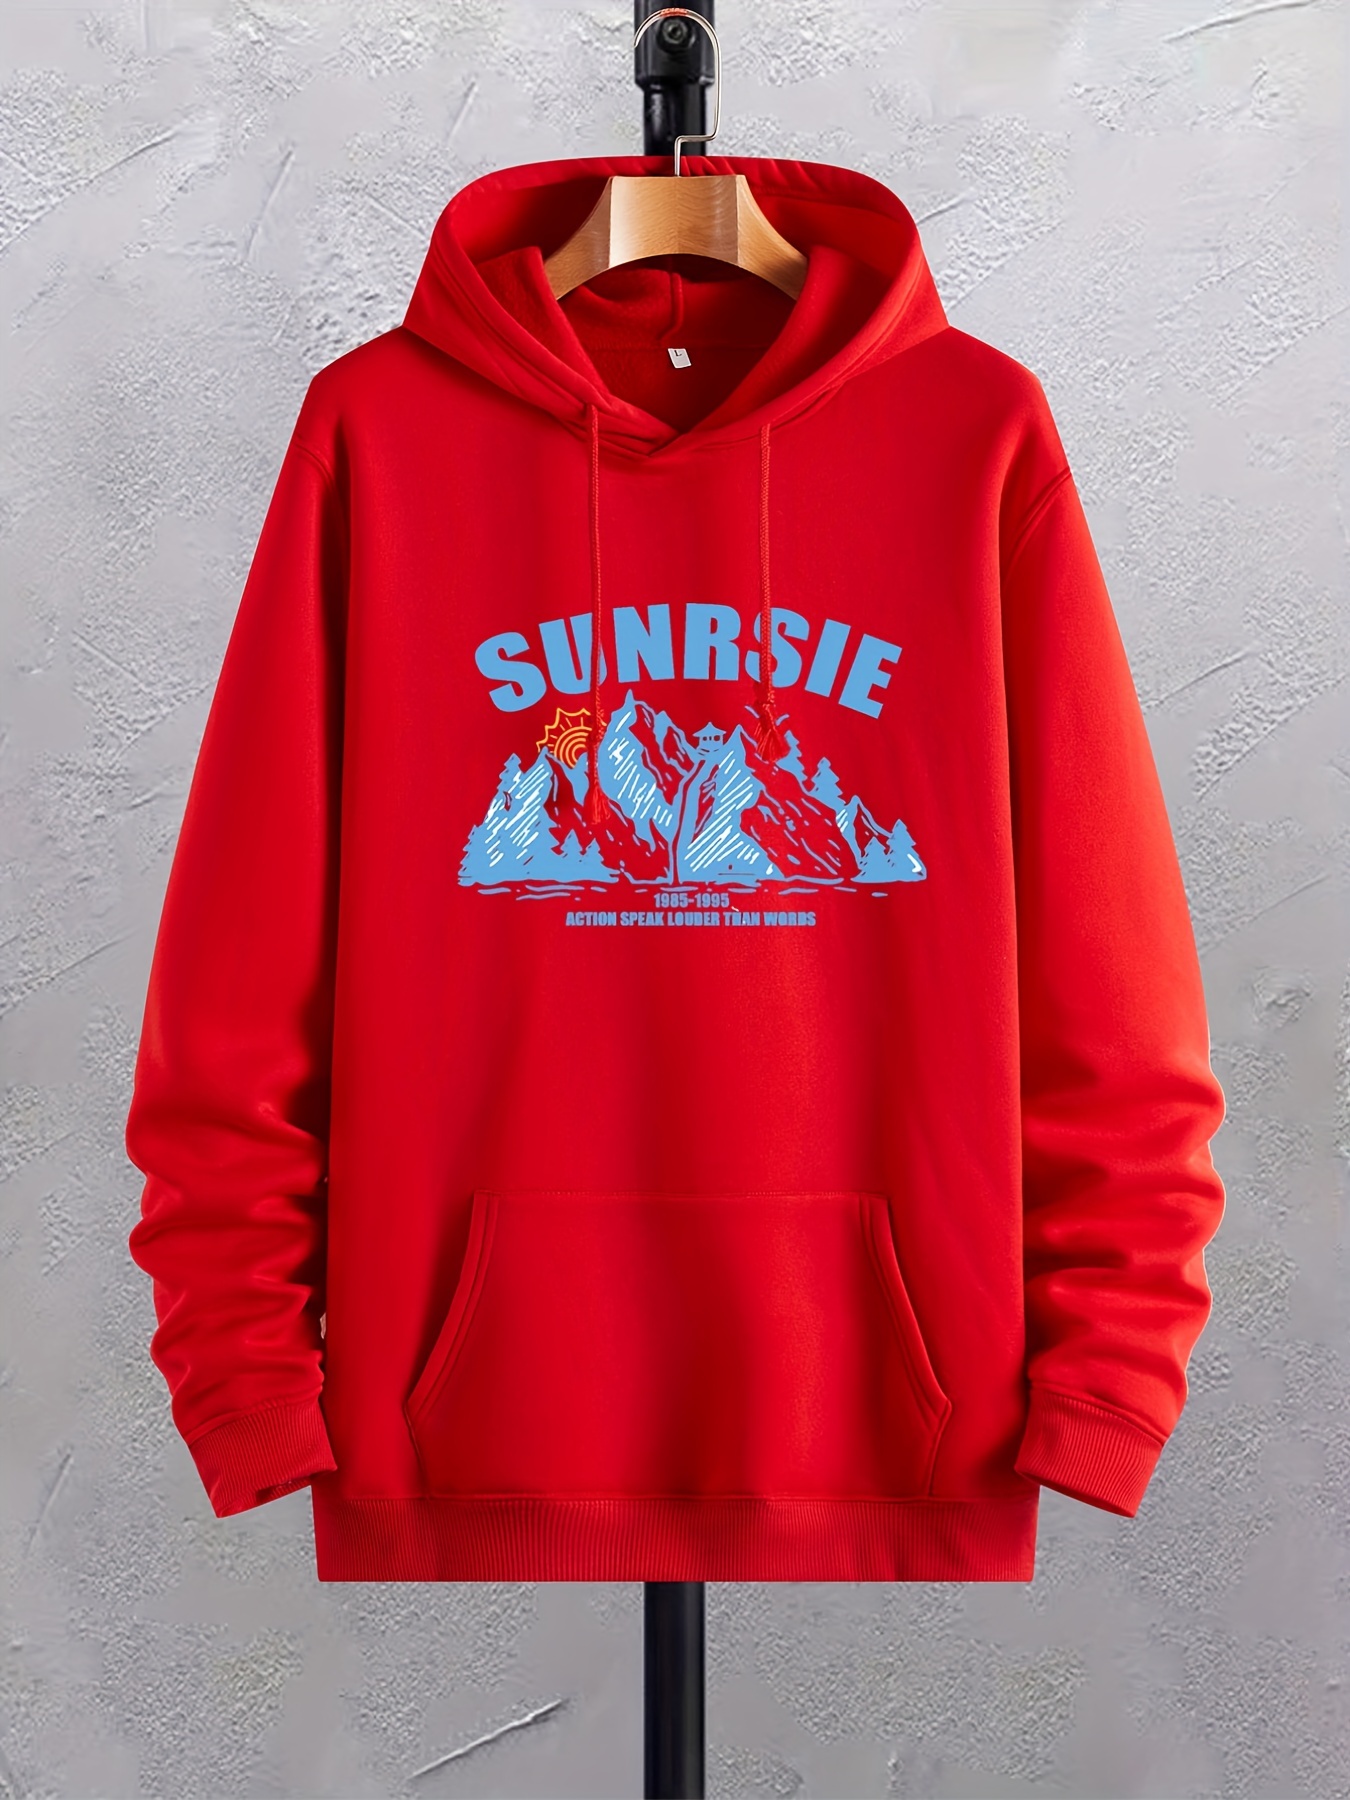 Sunset Print Hoodie, Cool Hoodies For Men, Men's Casual Graphic Design Pullover Hooded Sweatshirt With Kangaroo Pocket Streetwear For Winter Fall